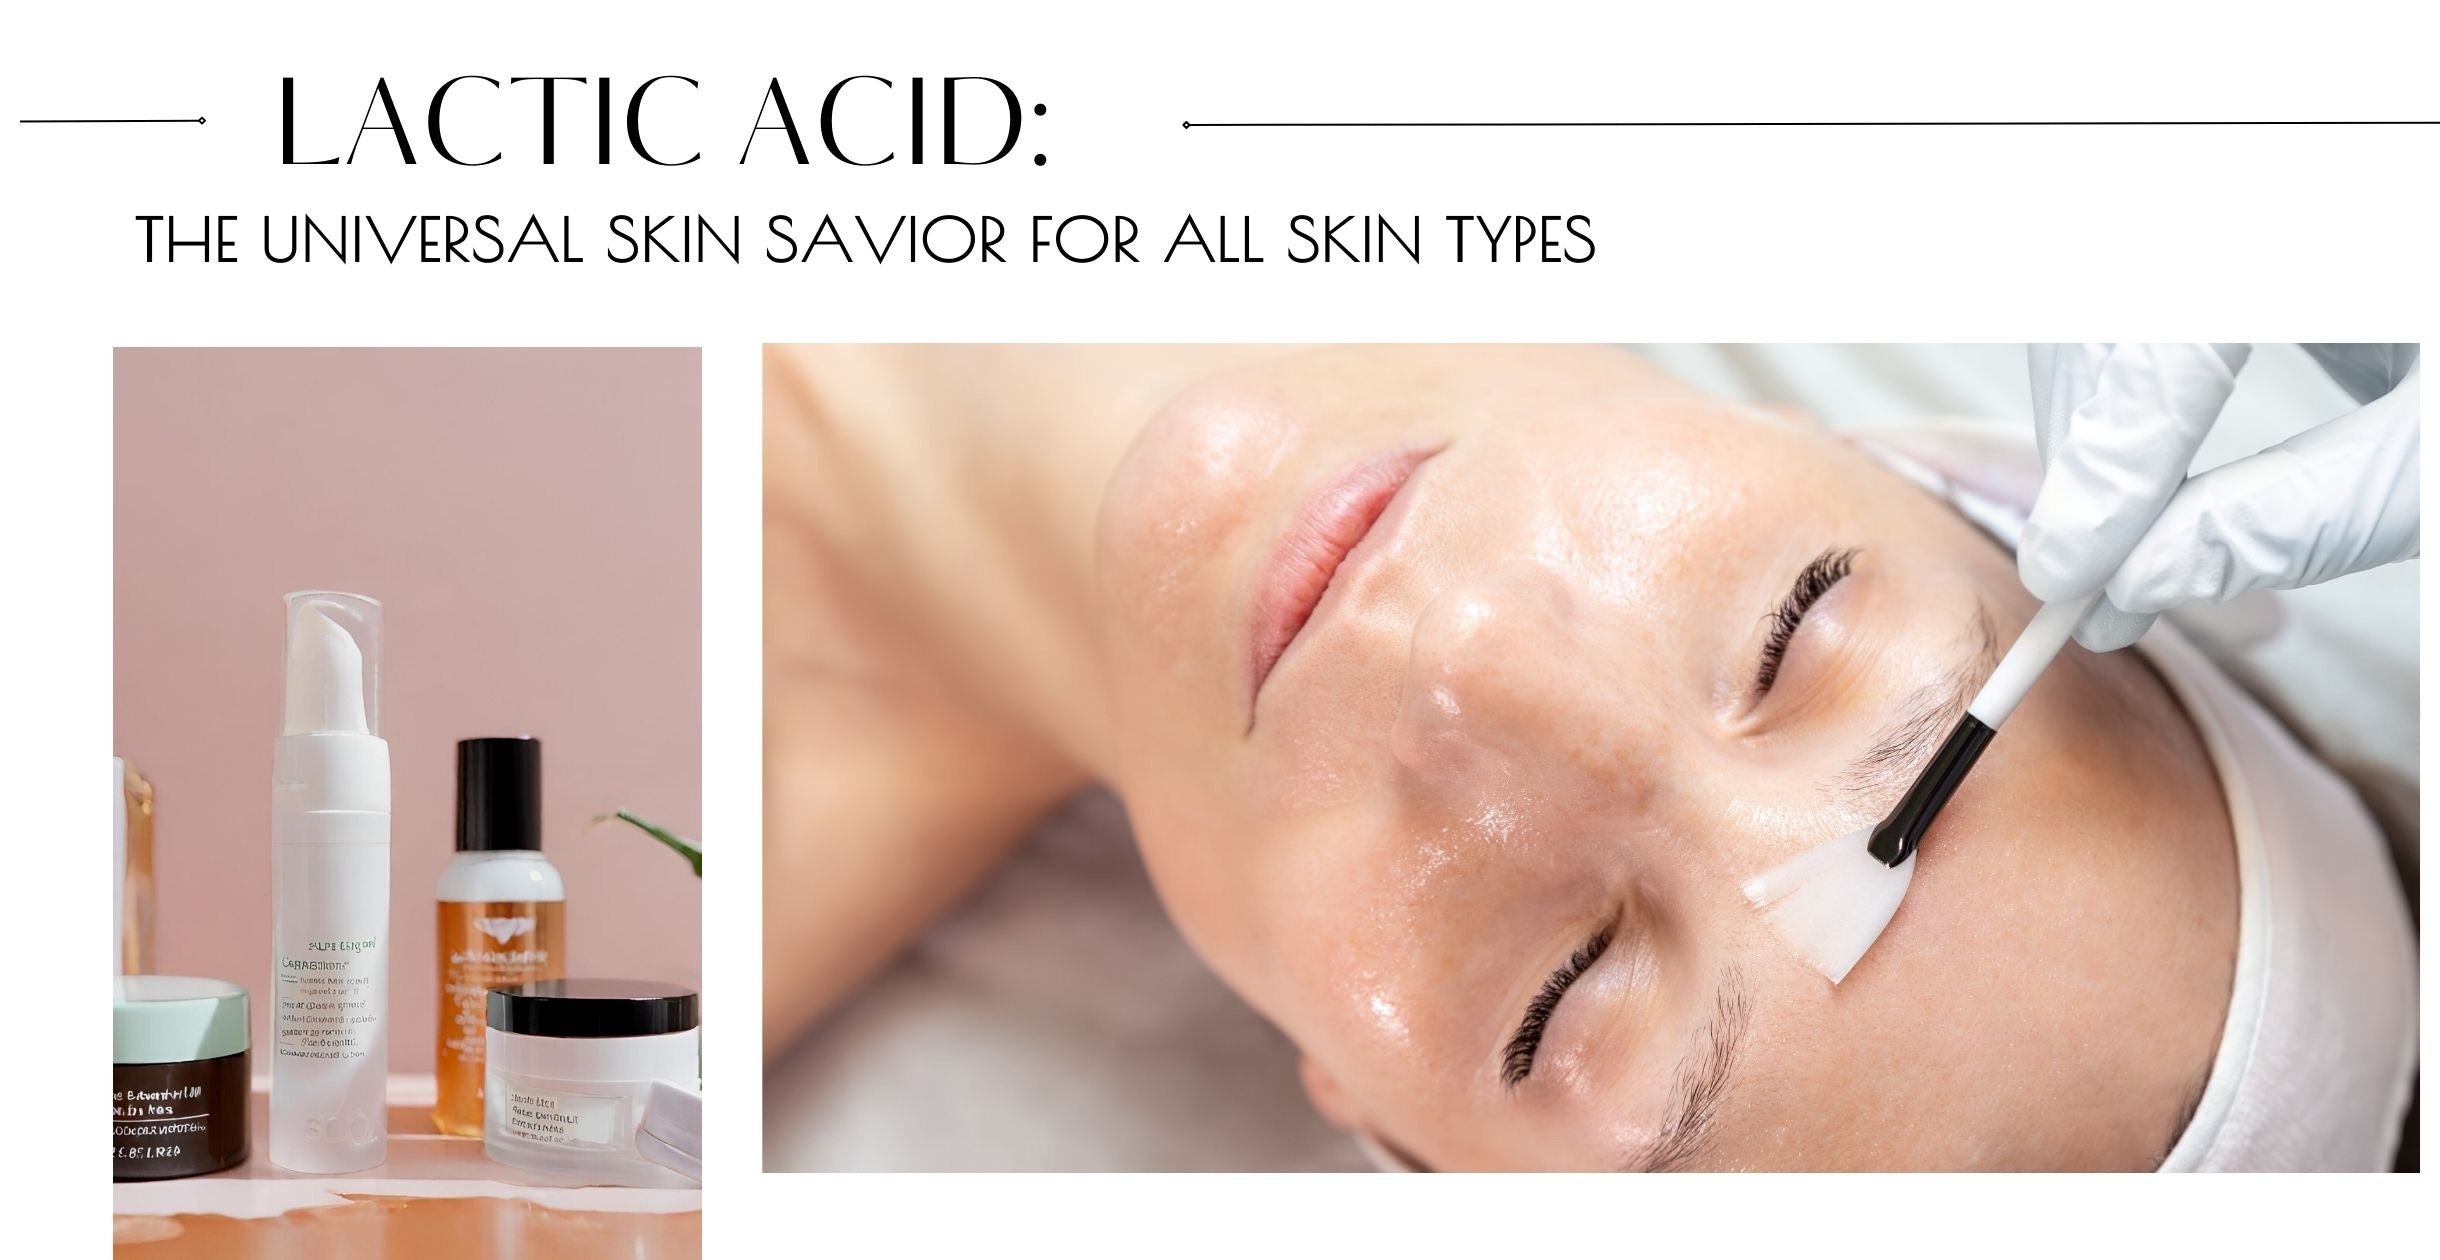 Lactic Acid: The Universal Skin Savior for All Skin Types